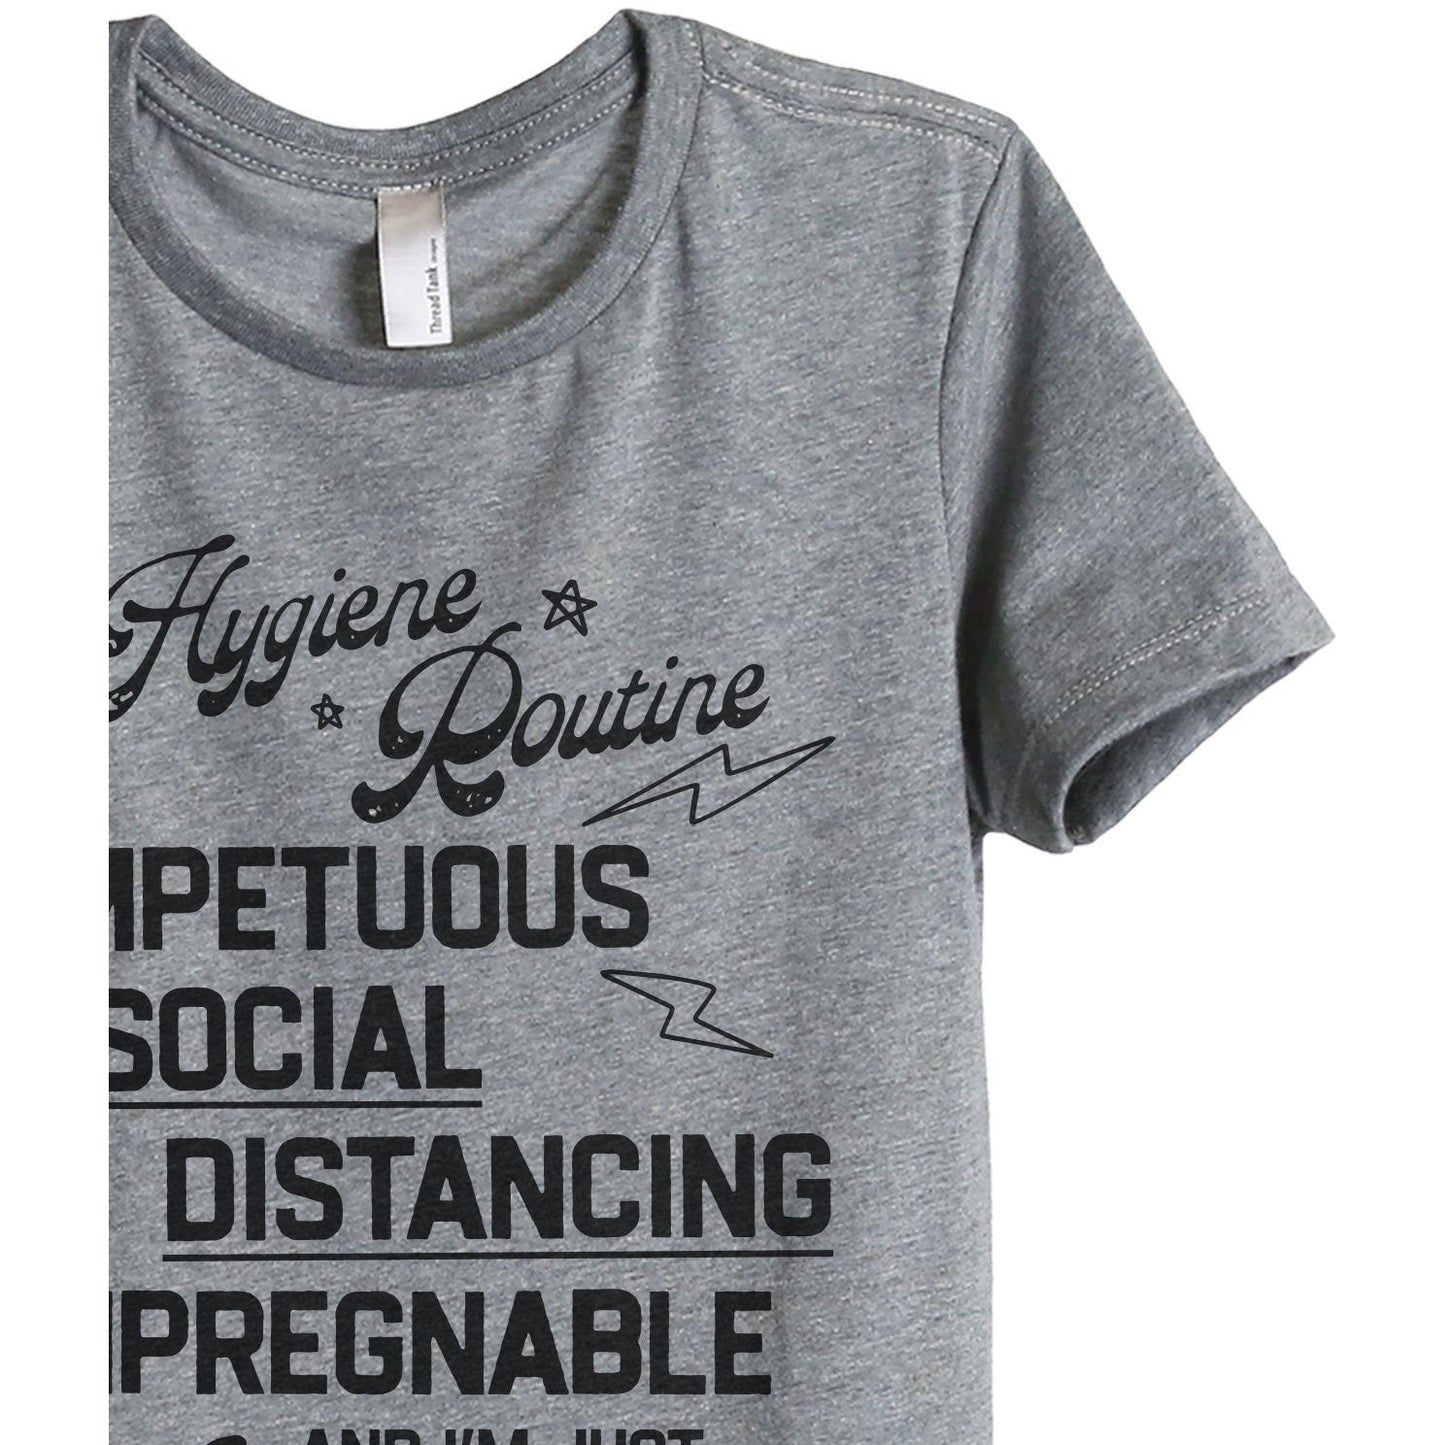 Hygiene Routine Impetuous Women's Relaxed Crewneck T-Shirt Top Tee Heather Grey Zoom Details
